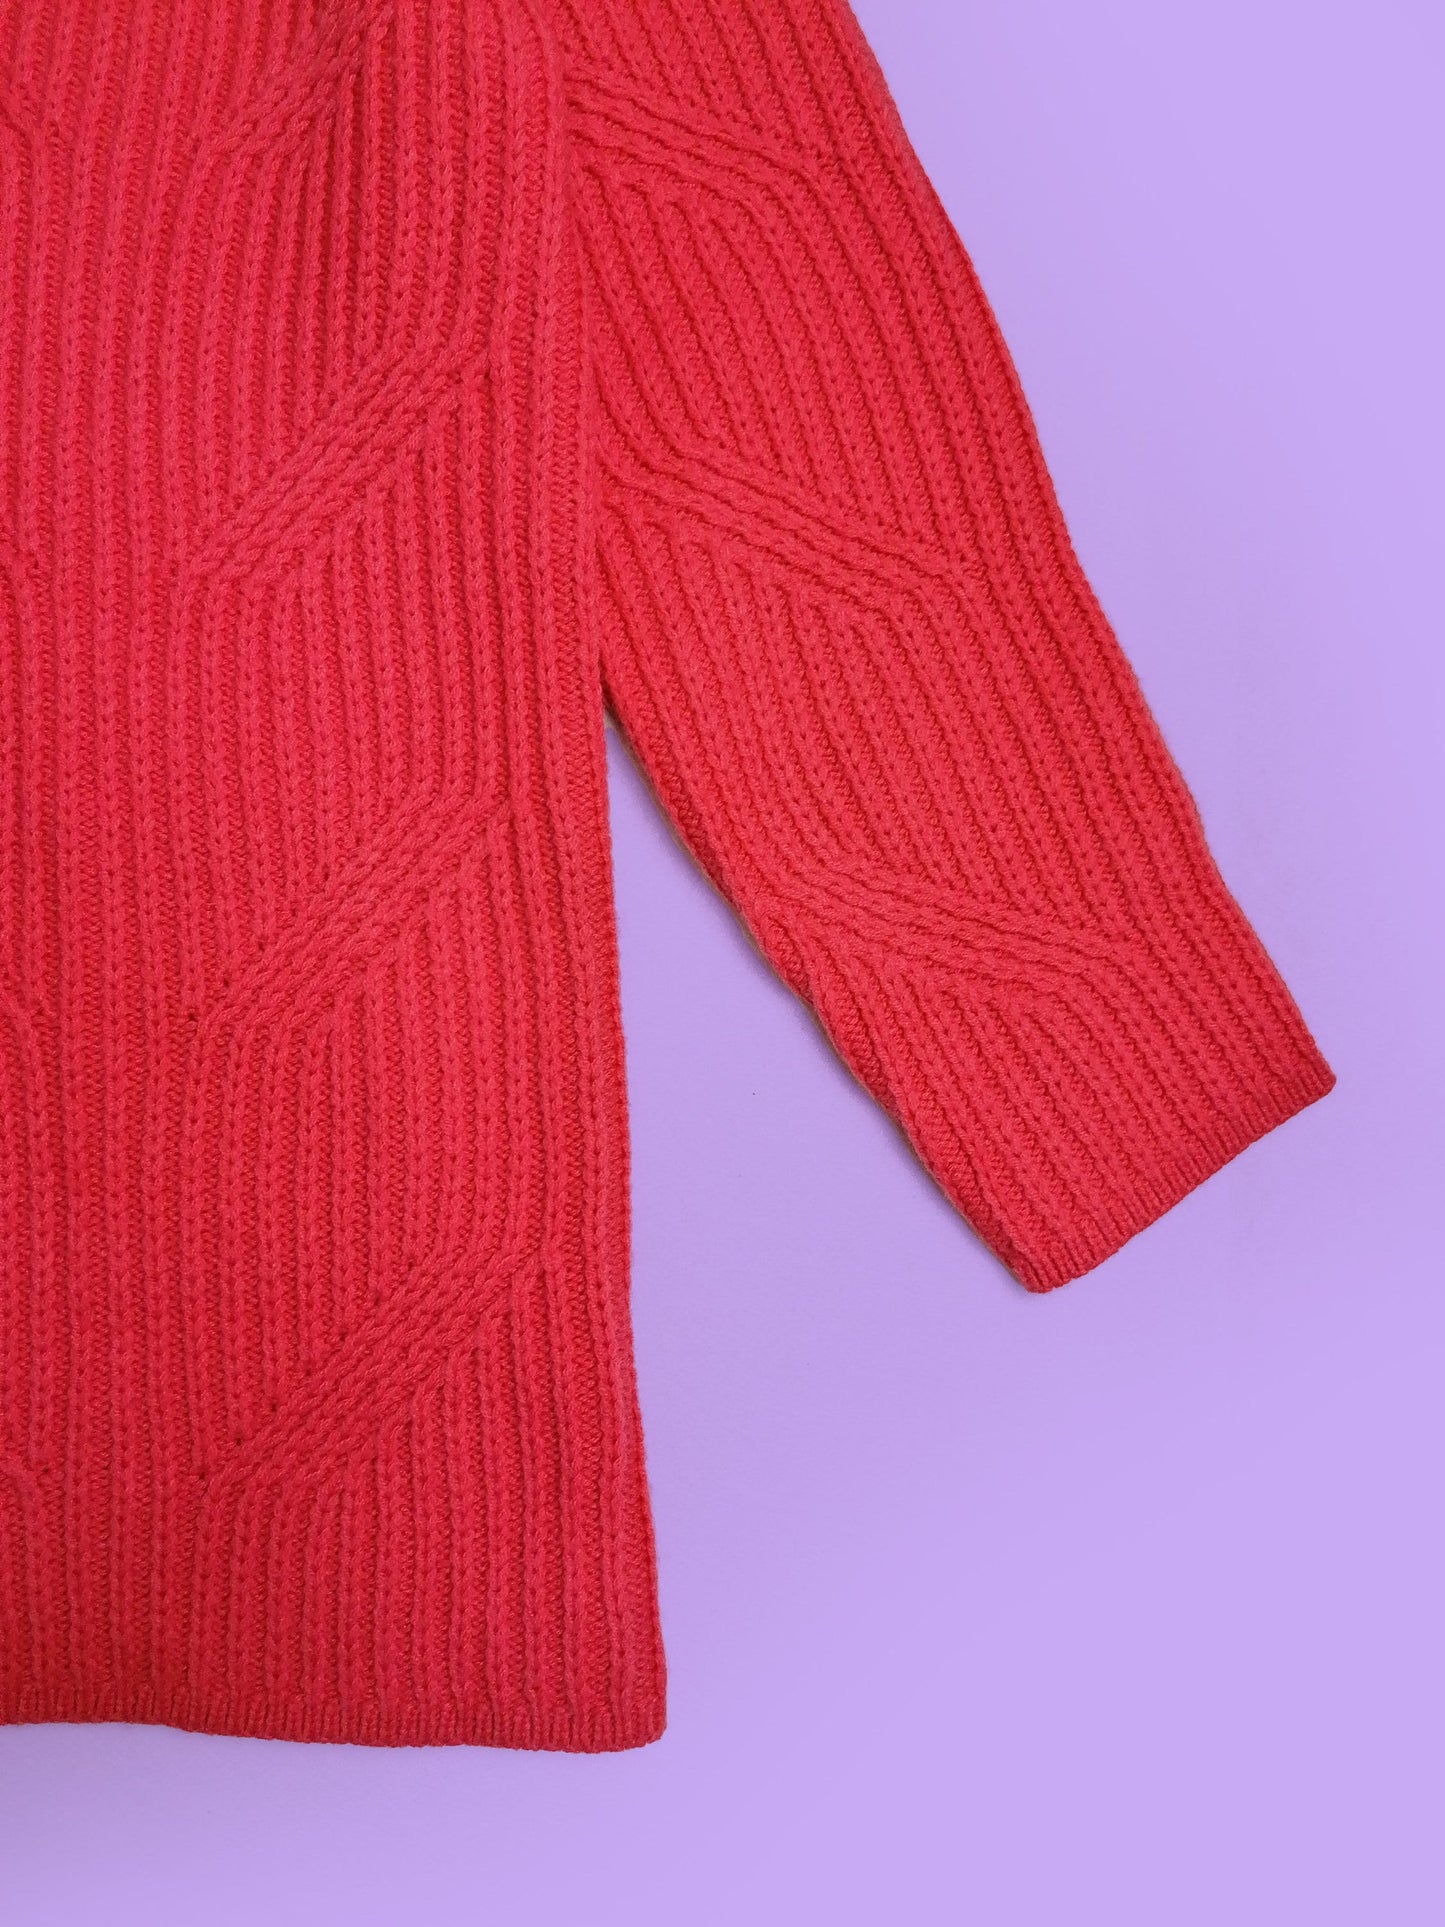 90's Virgin Wool Cable Knit Pink Sweater - size S-M